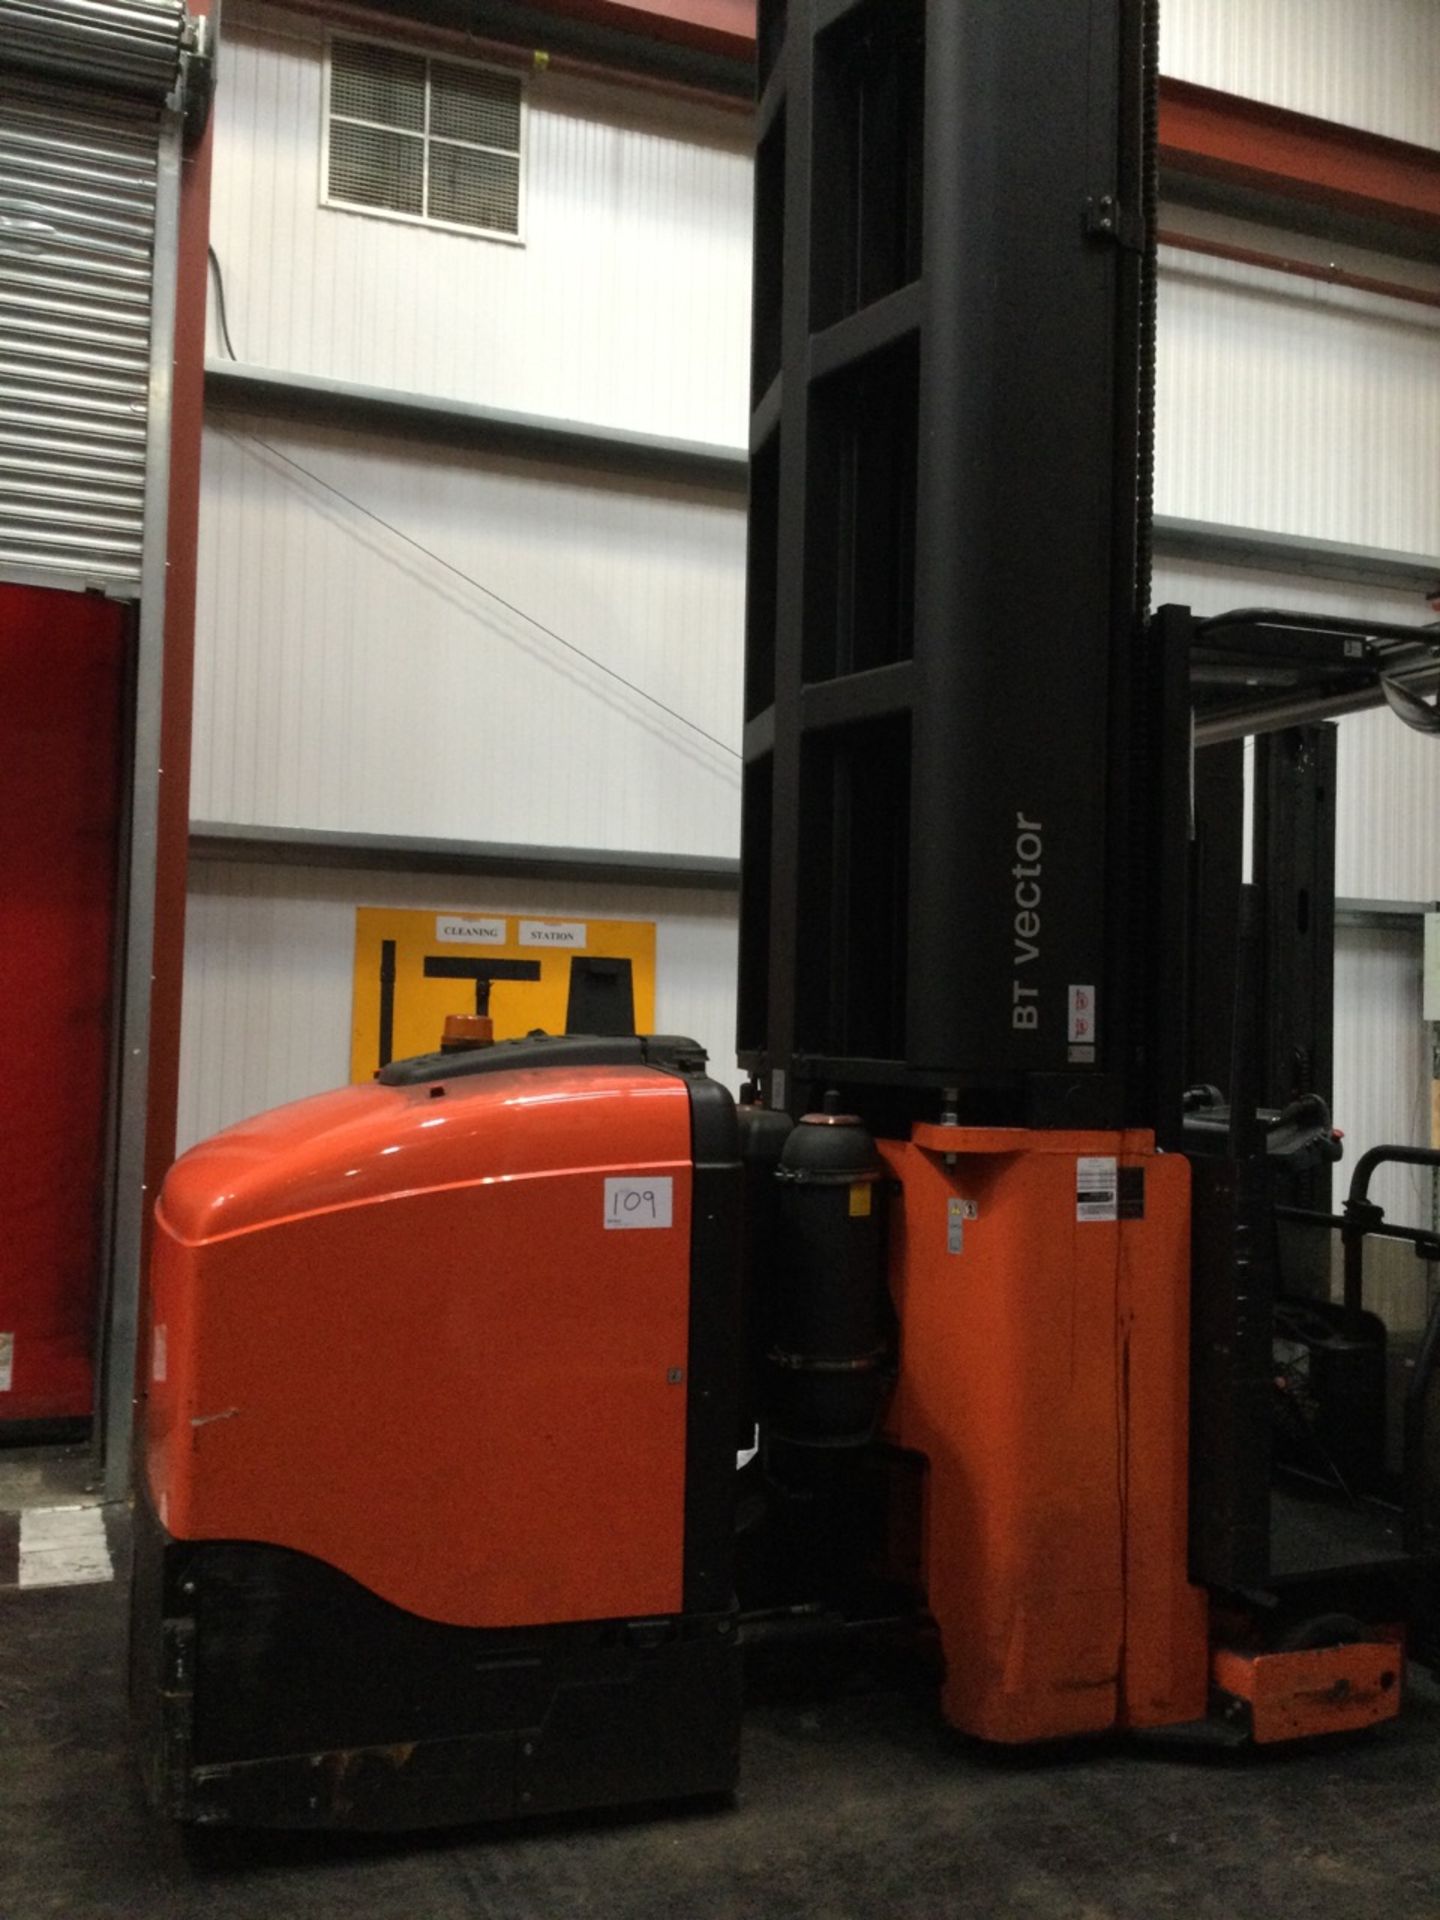 1 BT (Toyota) Vector, VCE 150A, Very narrow aisle electric forklift with charger, Serial Number: 64 - Image 2 of 5